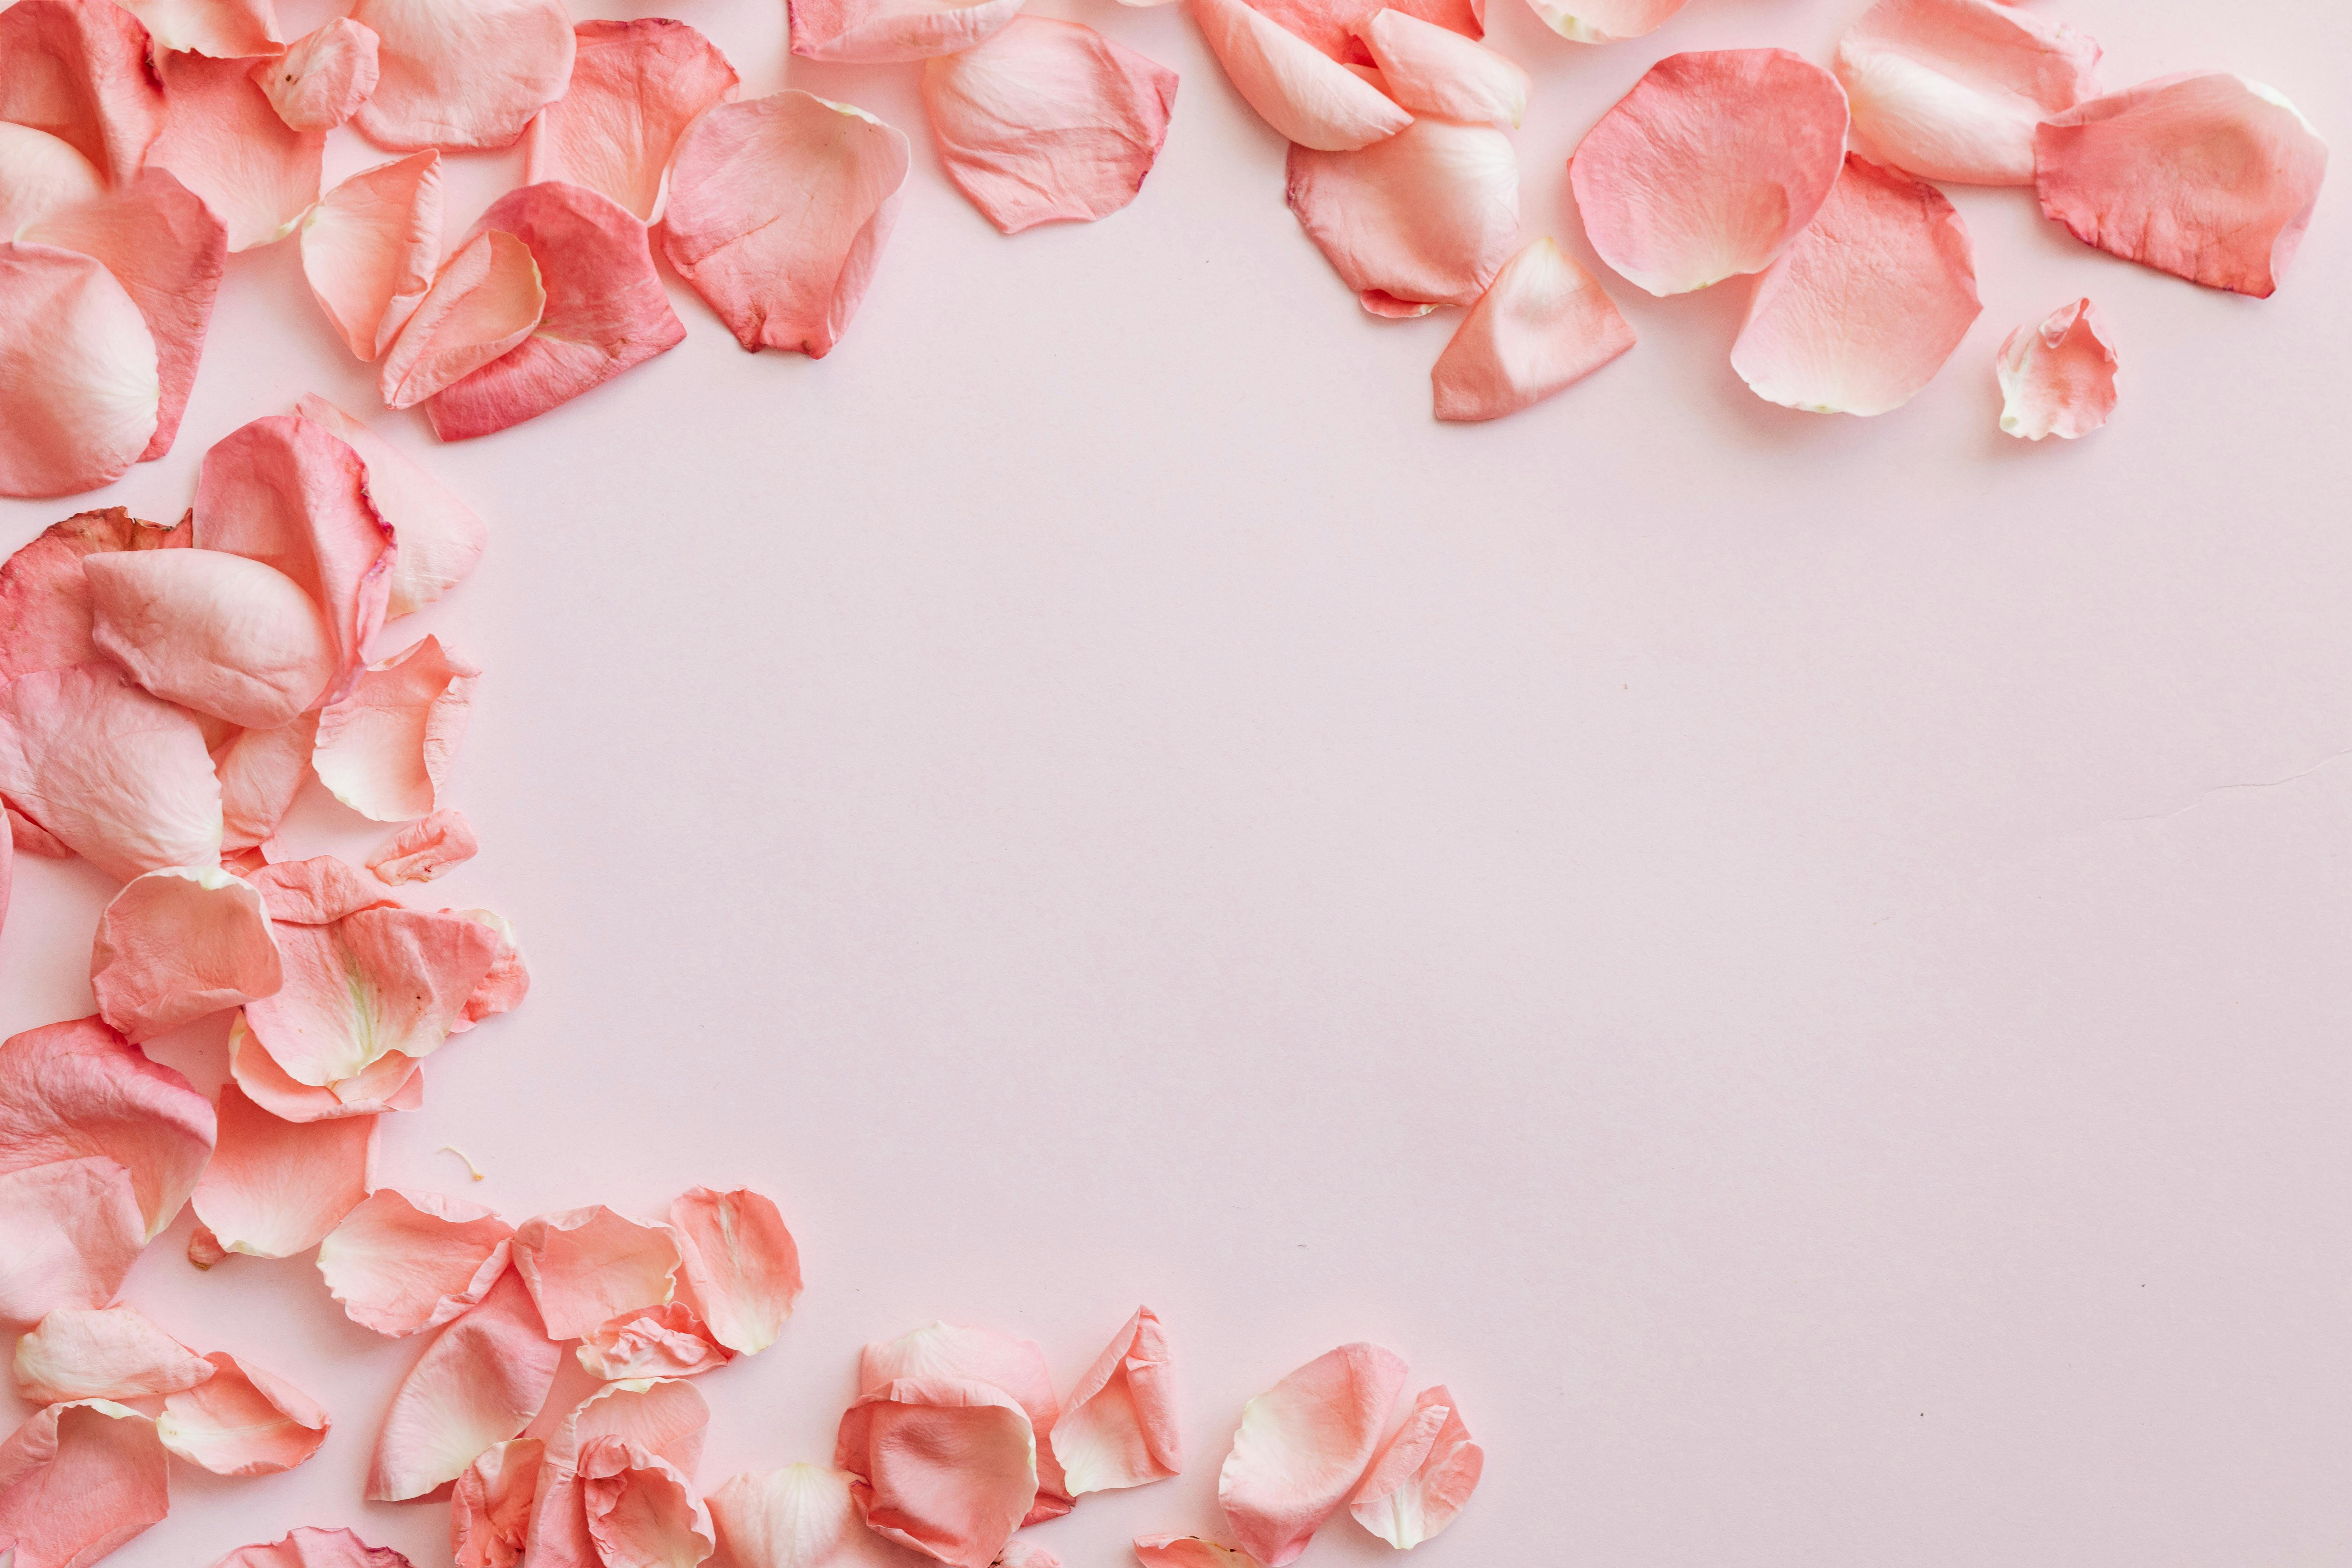 Lots of pink roses petals on pink surface · Free Stock Photo